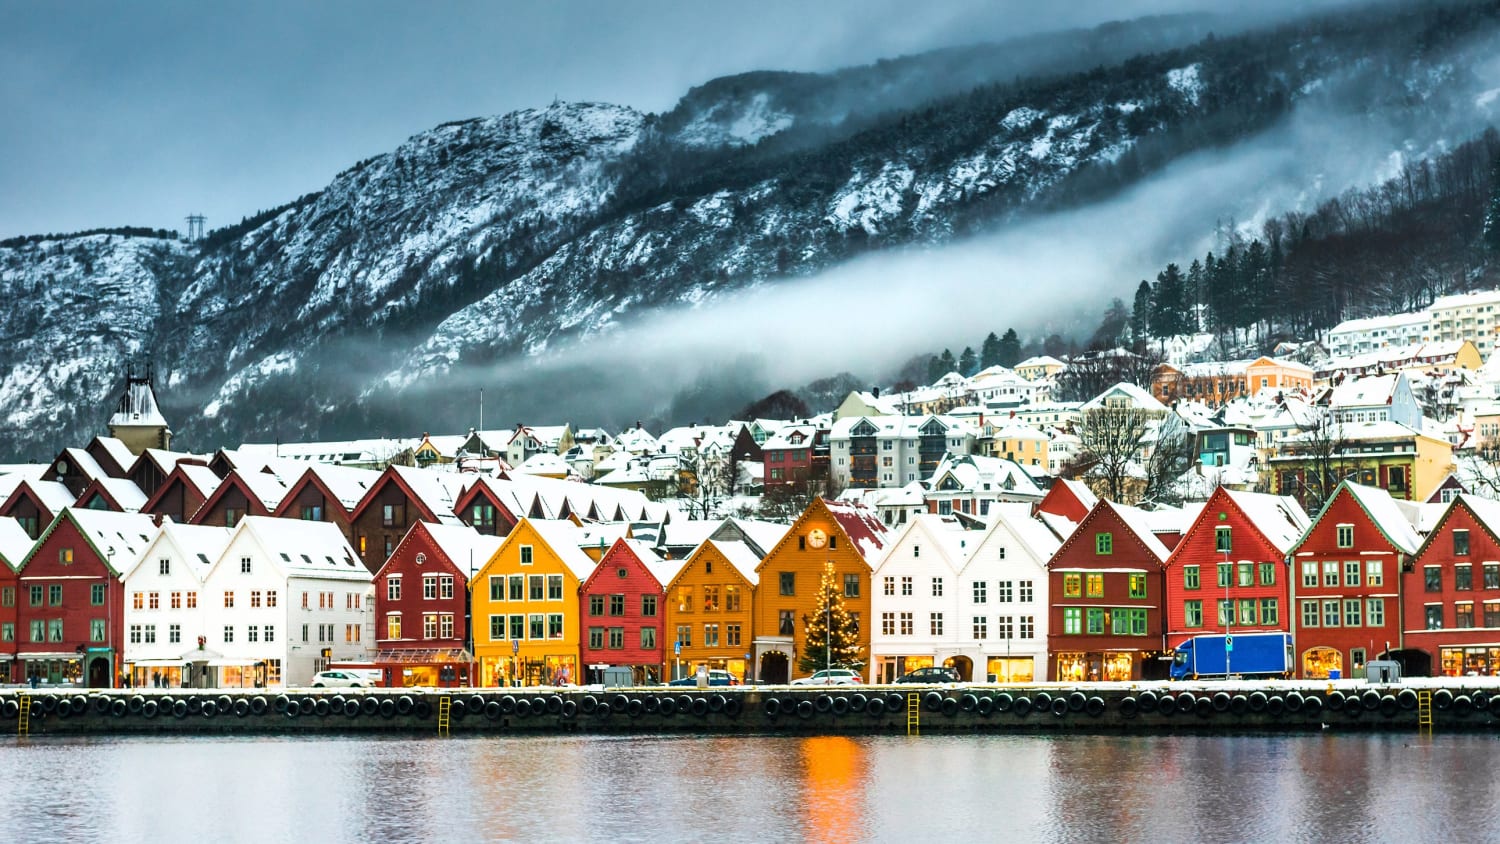 19 Photos That Will Make You Want to Visit Norway